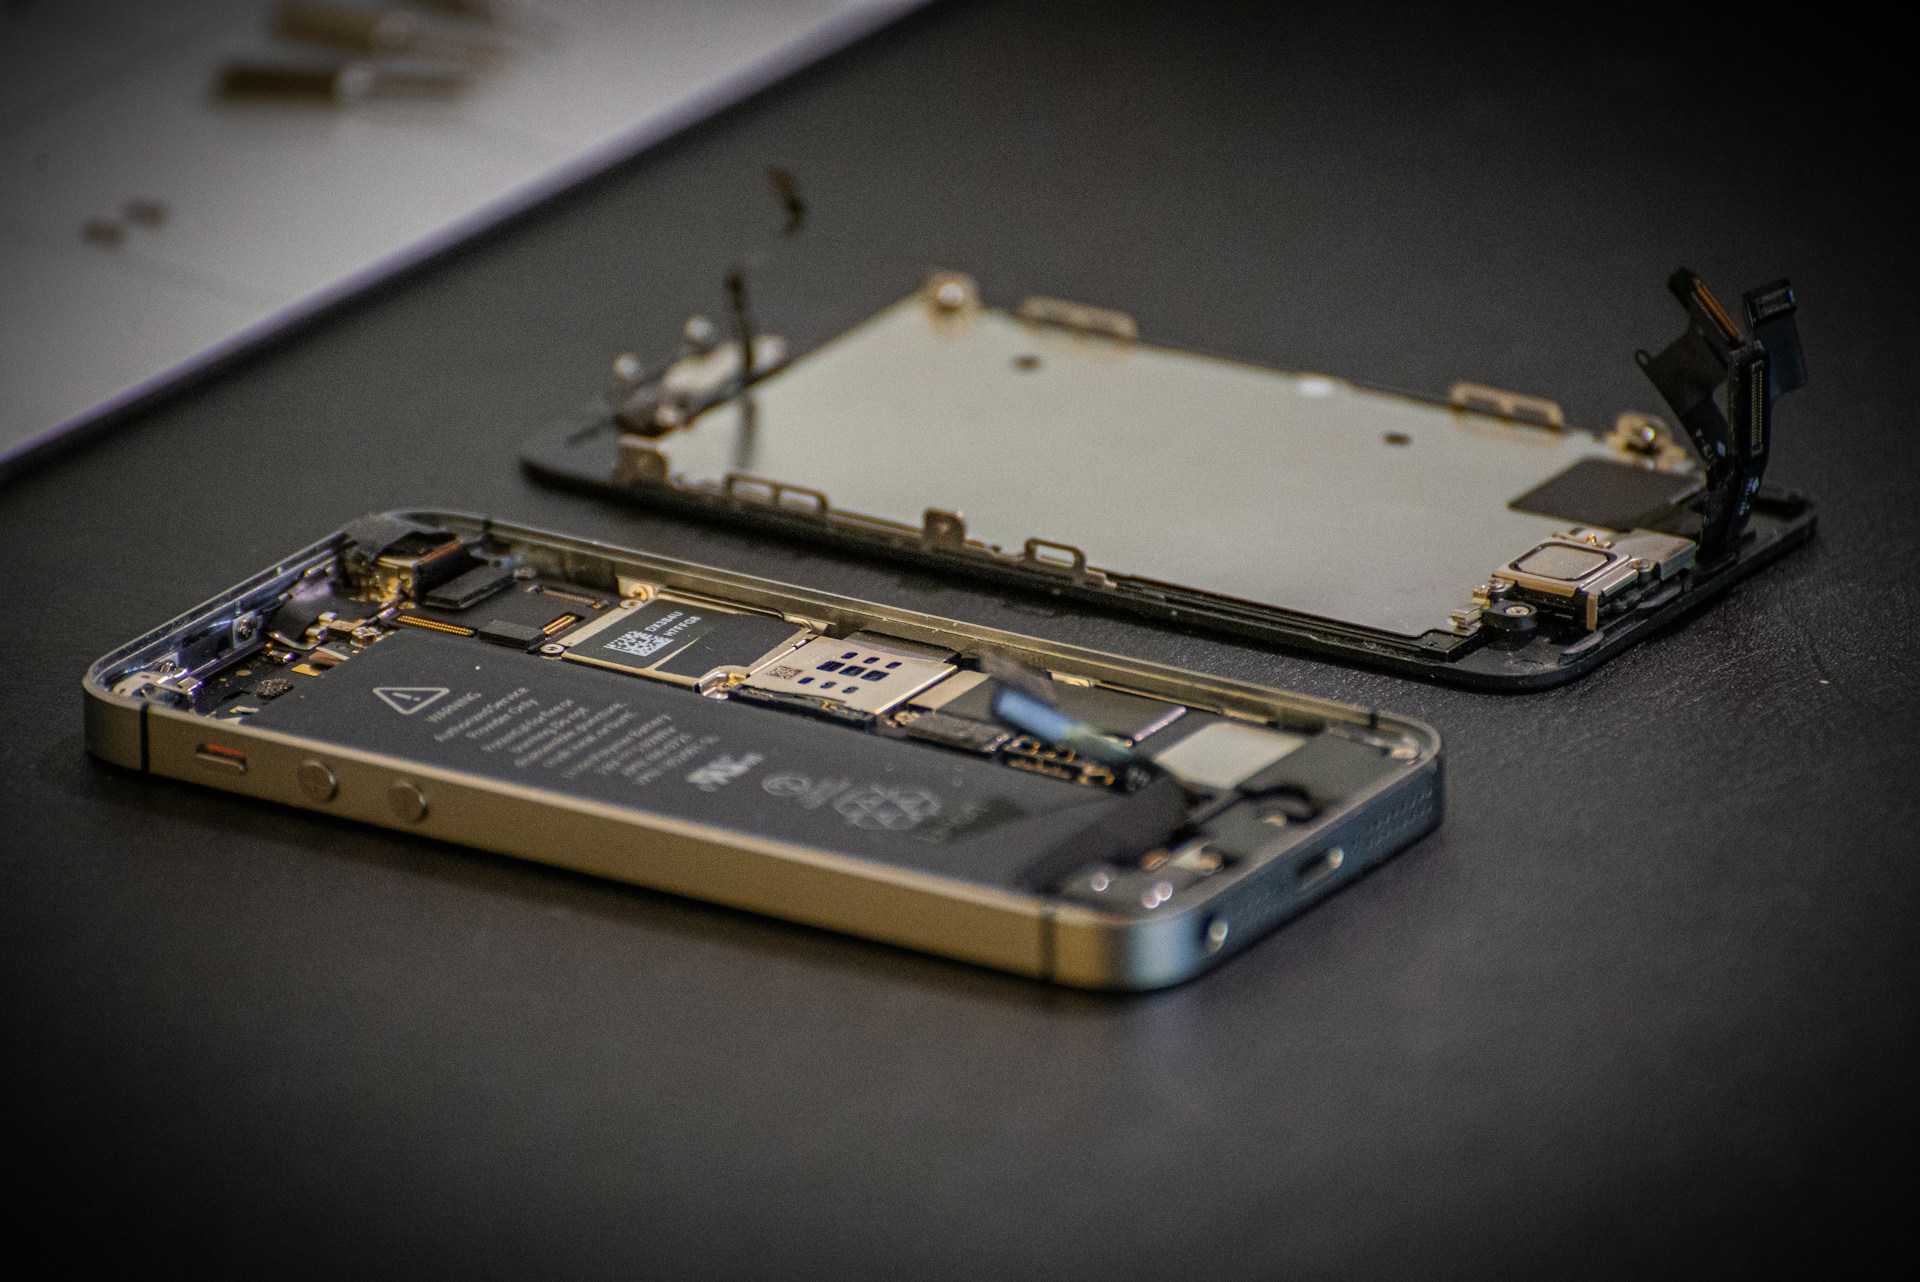 Apple Developing an iPhone with a Replaceable Battery